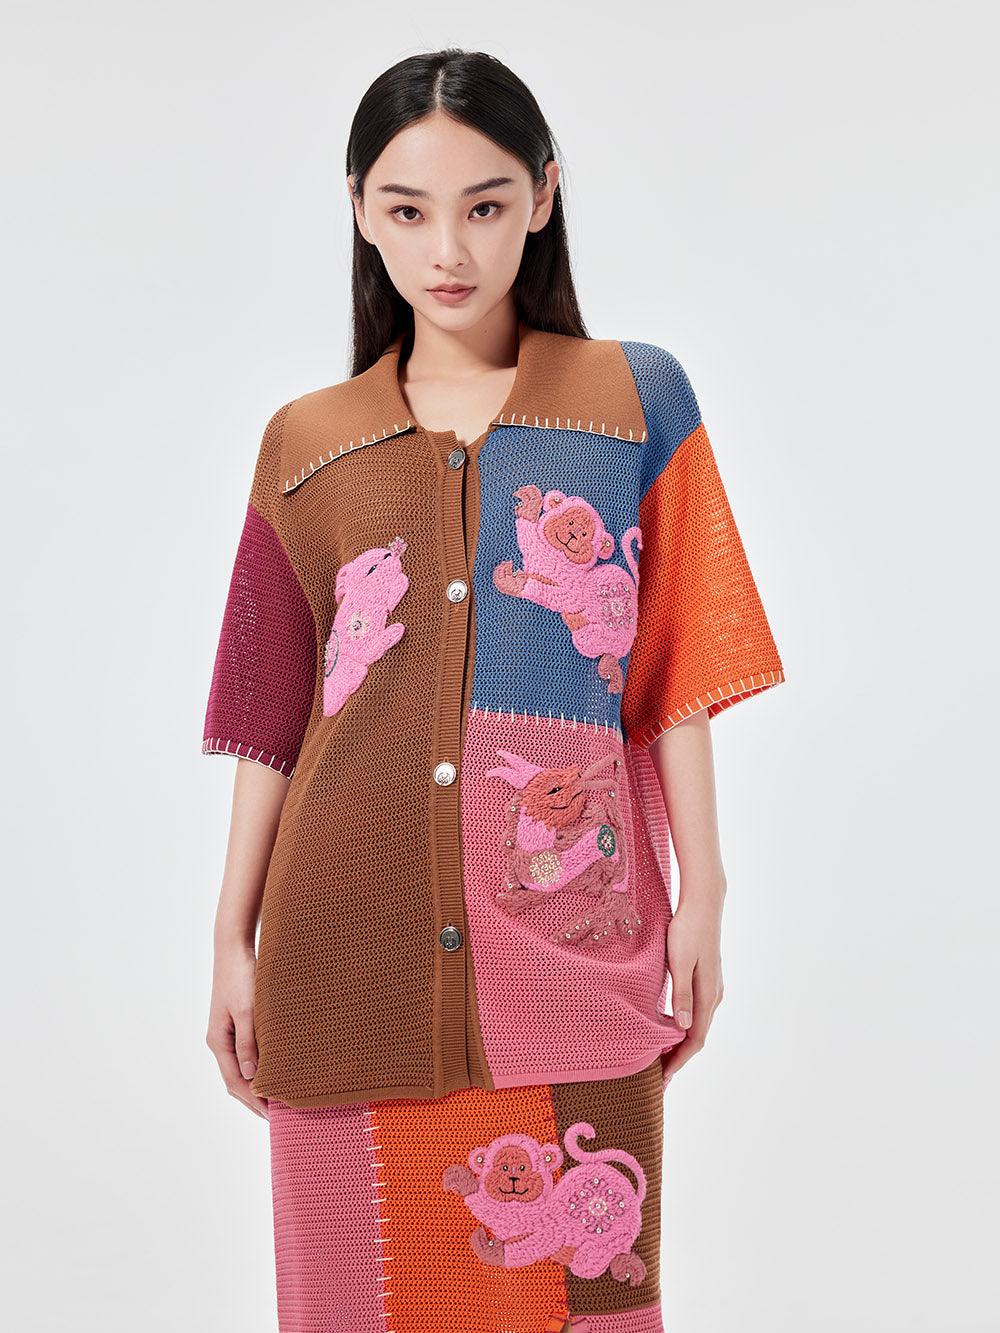 MUKZIN Multi-color Patchwork Knitted Shirt